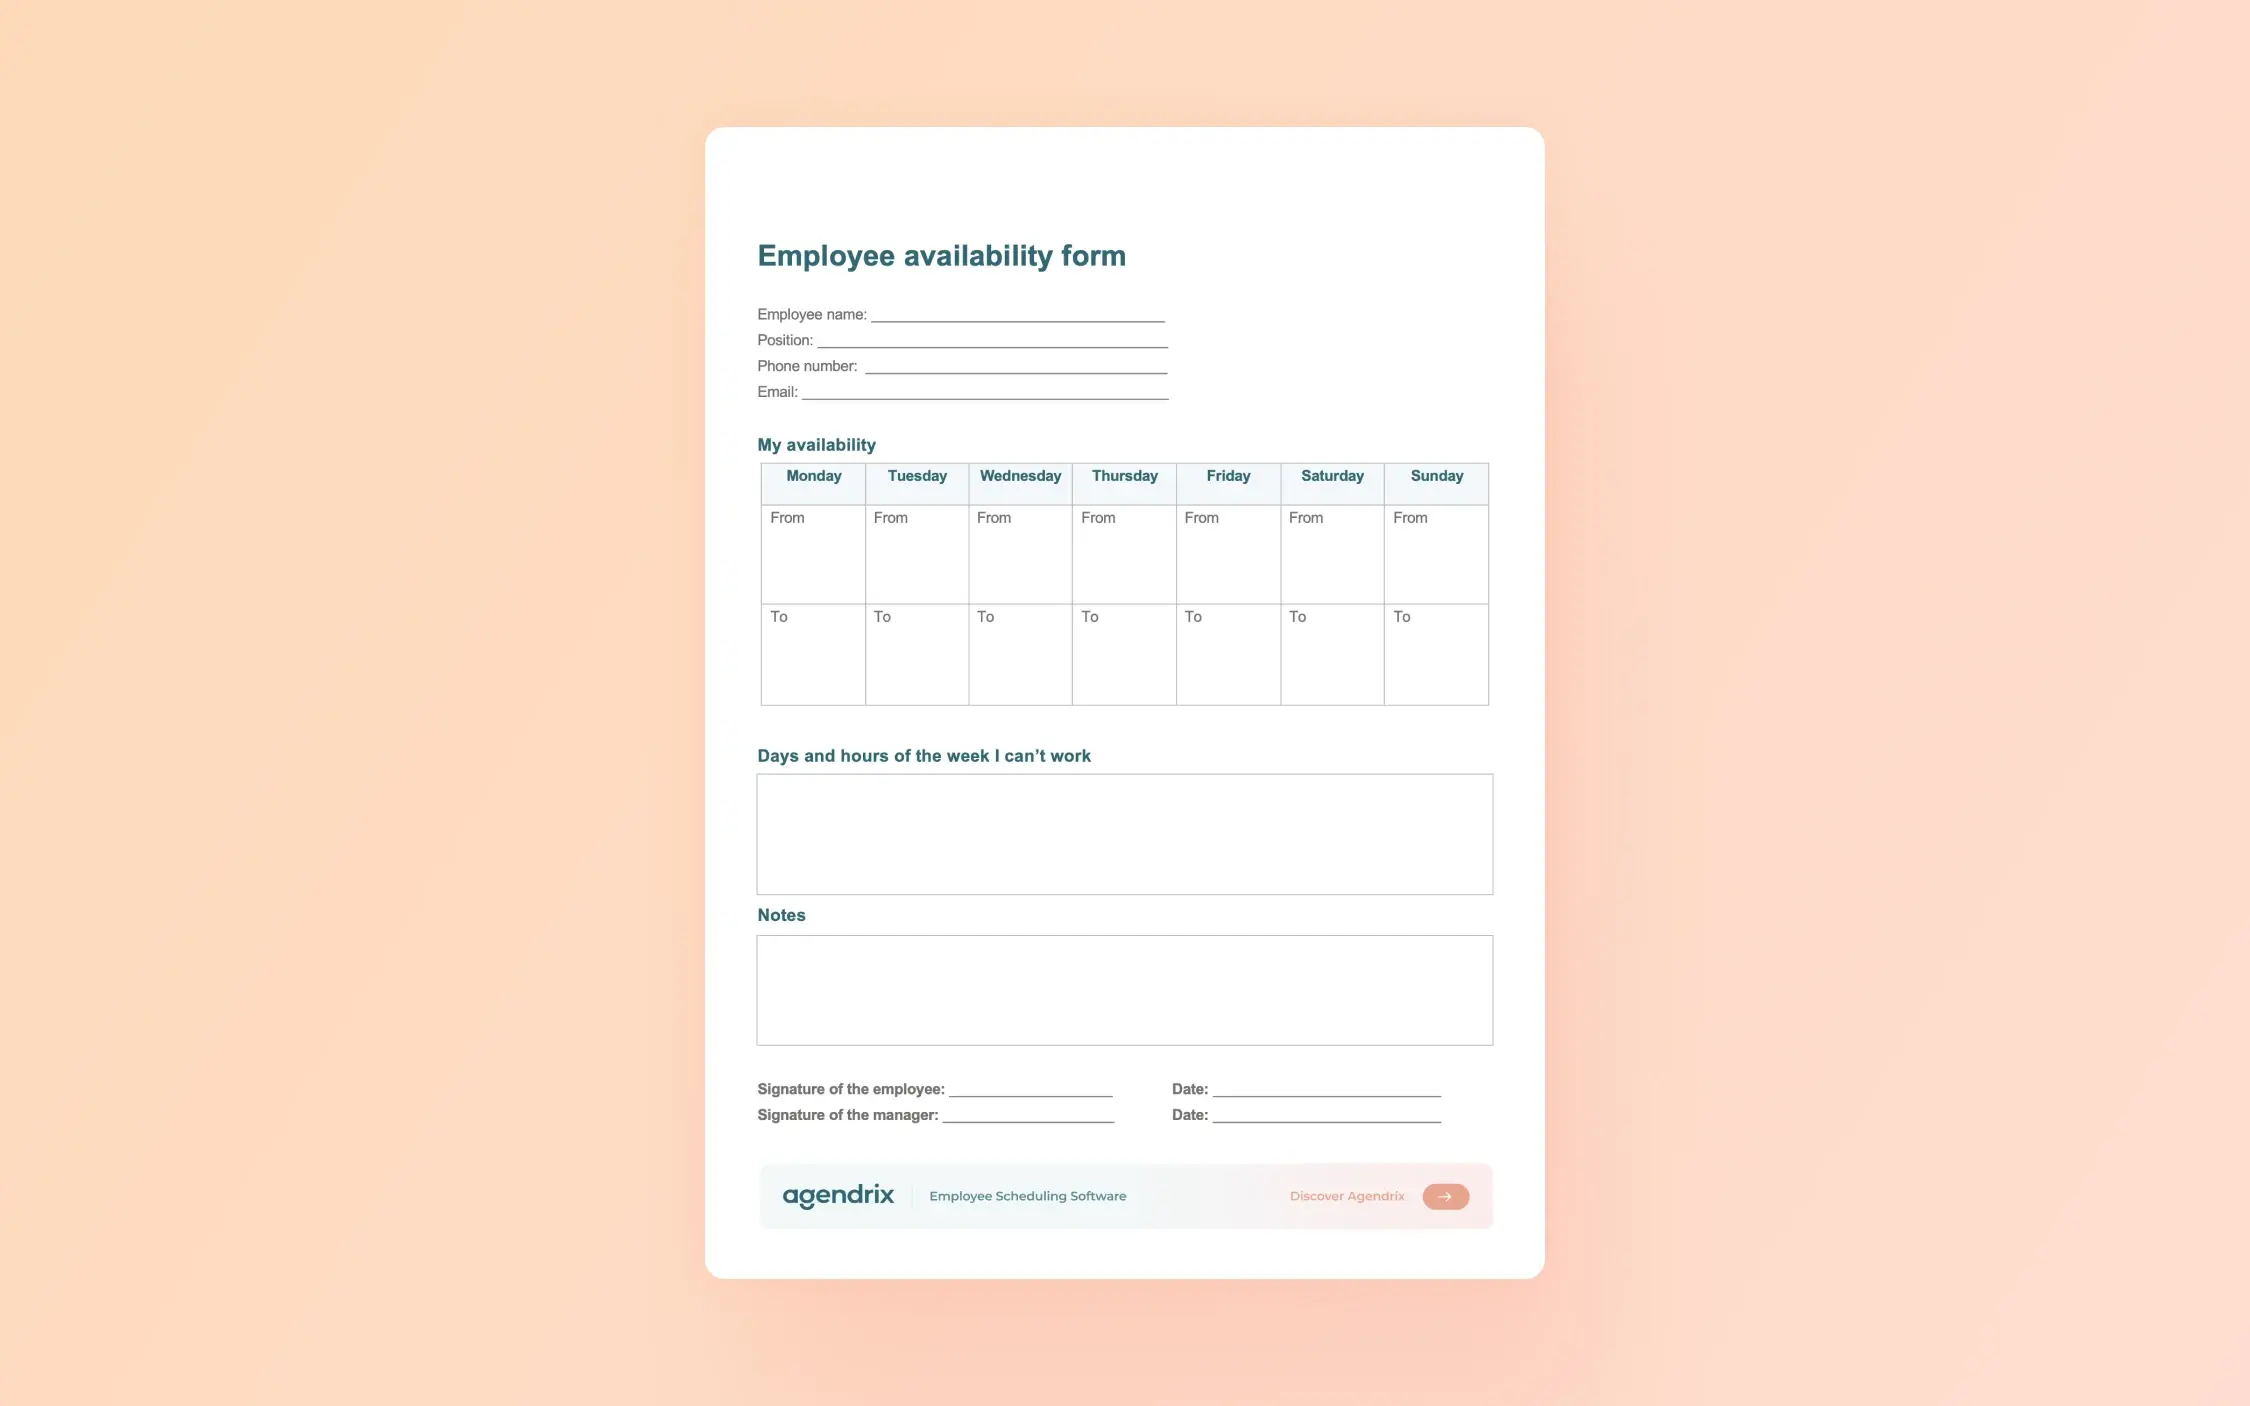 Employee availability form on a Word document